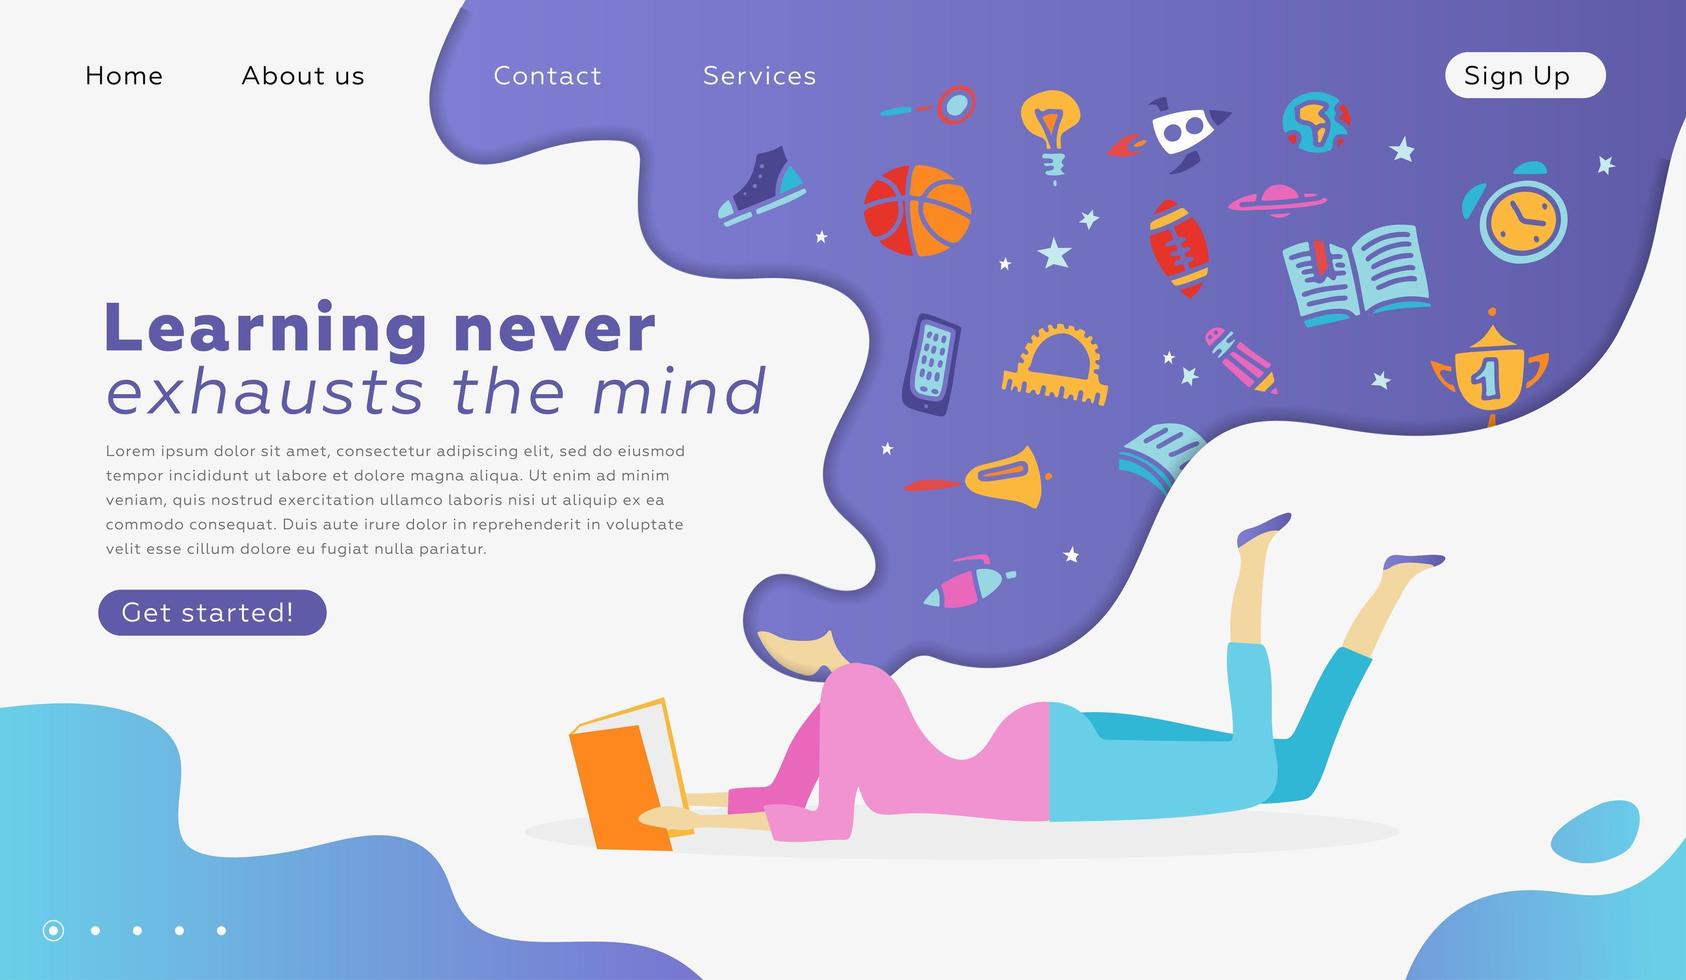 Web page design templates for education, learning, back to school. Modern vector illustration concept for website and mobile website development. Lying Girl reading a book. School supplies in thoughts